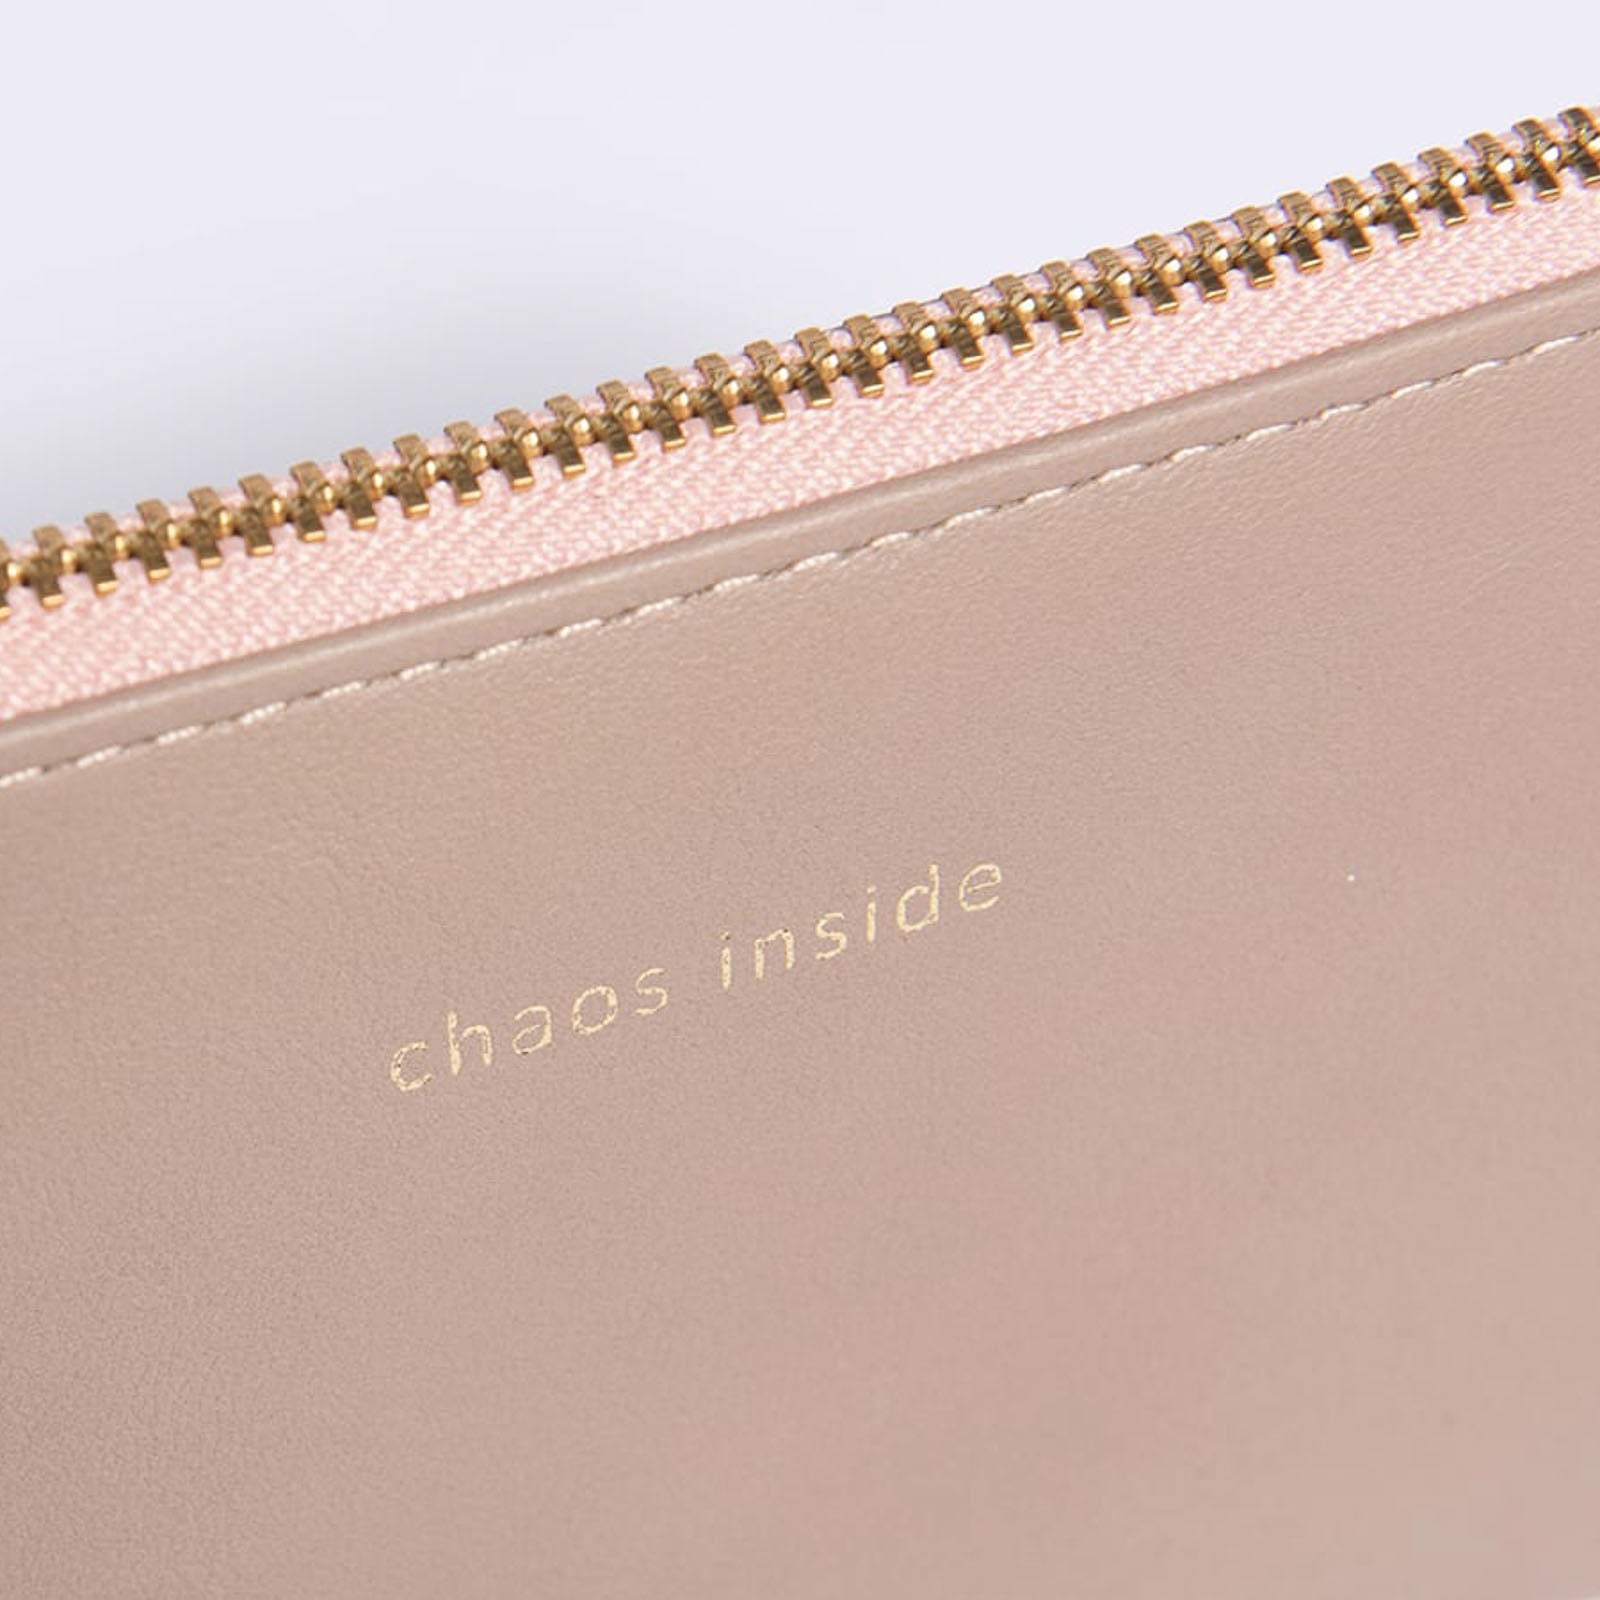 Pouch XS "Chaos Inside"